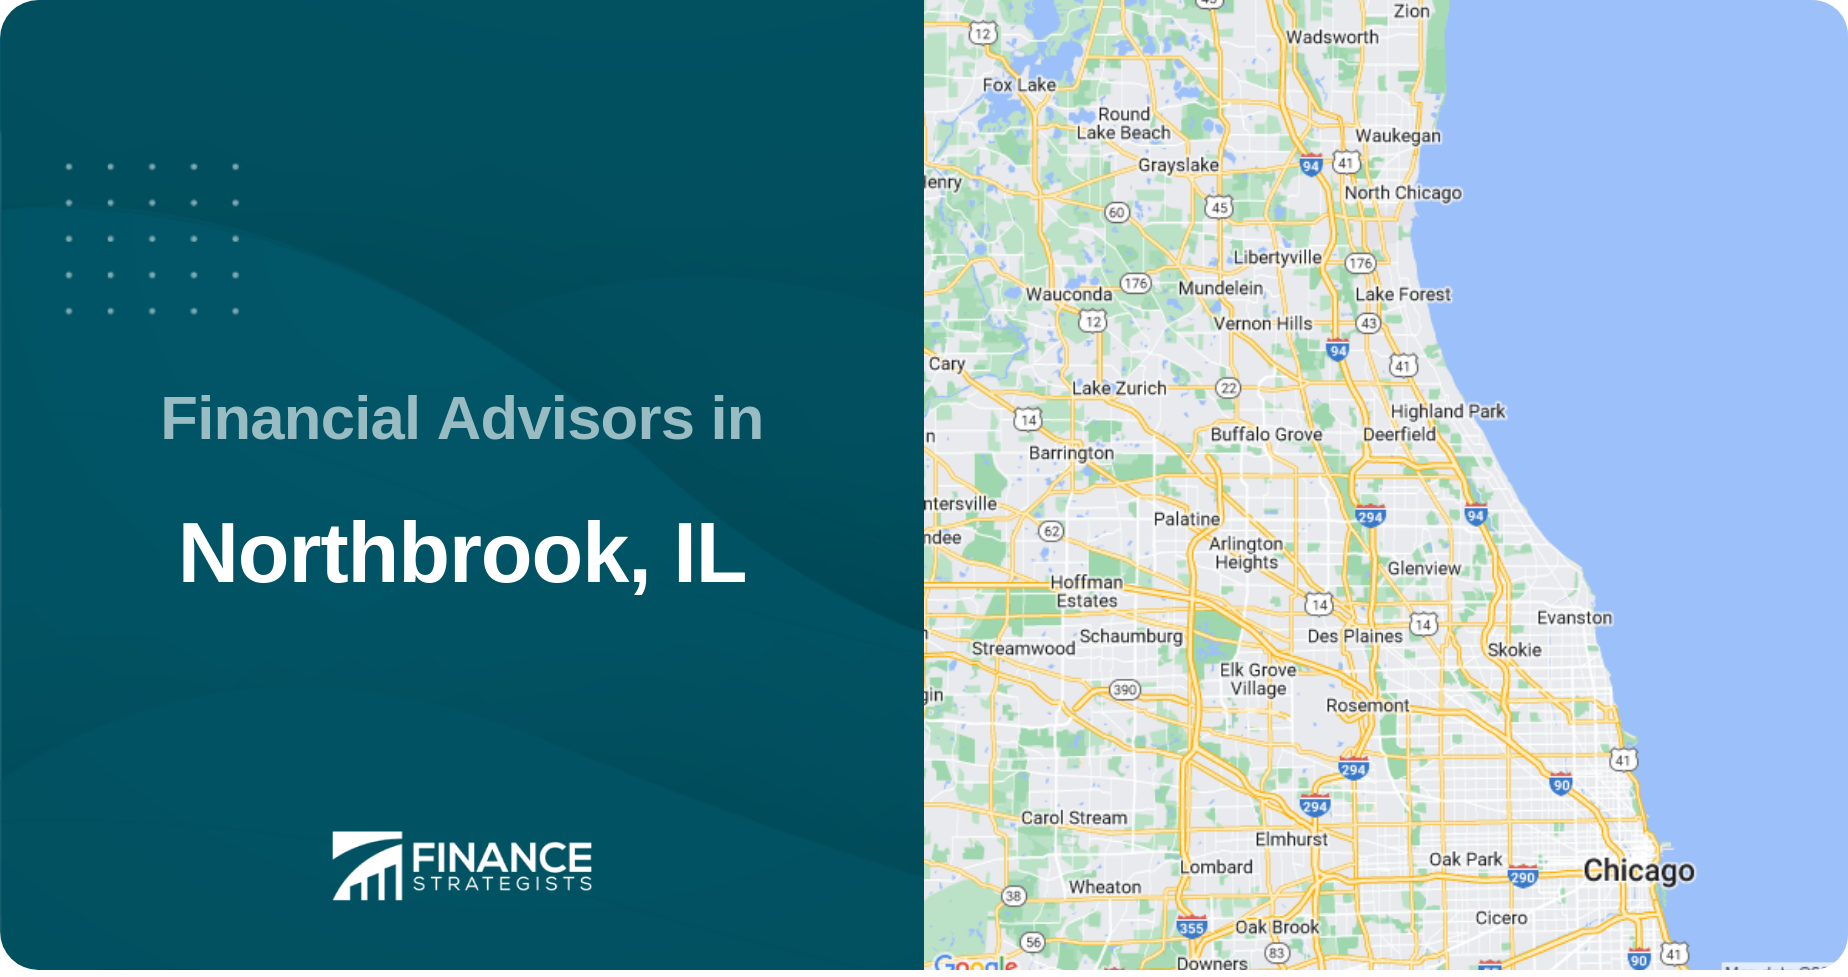 Financial Advisors in Northbrook, IL